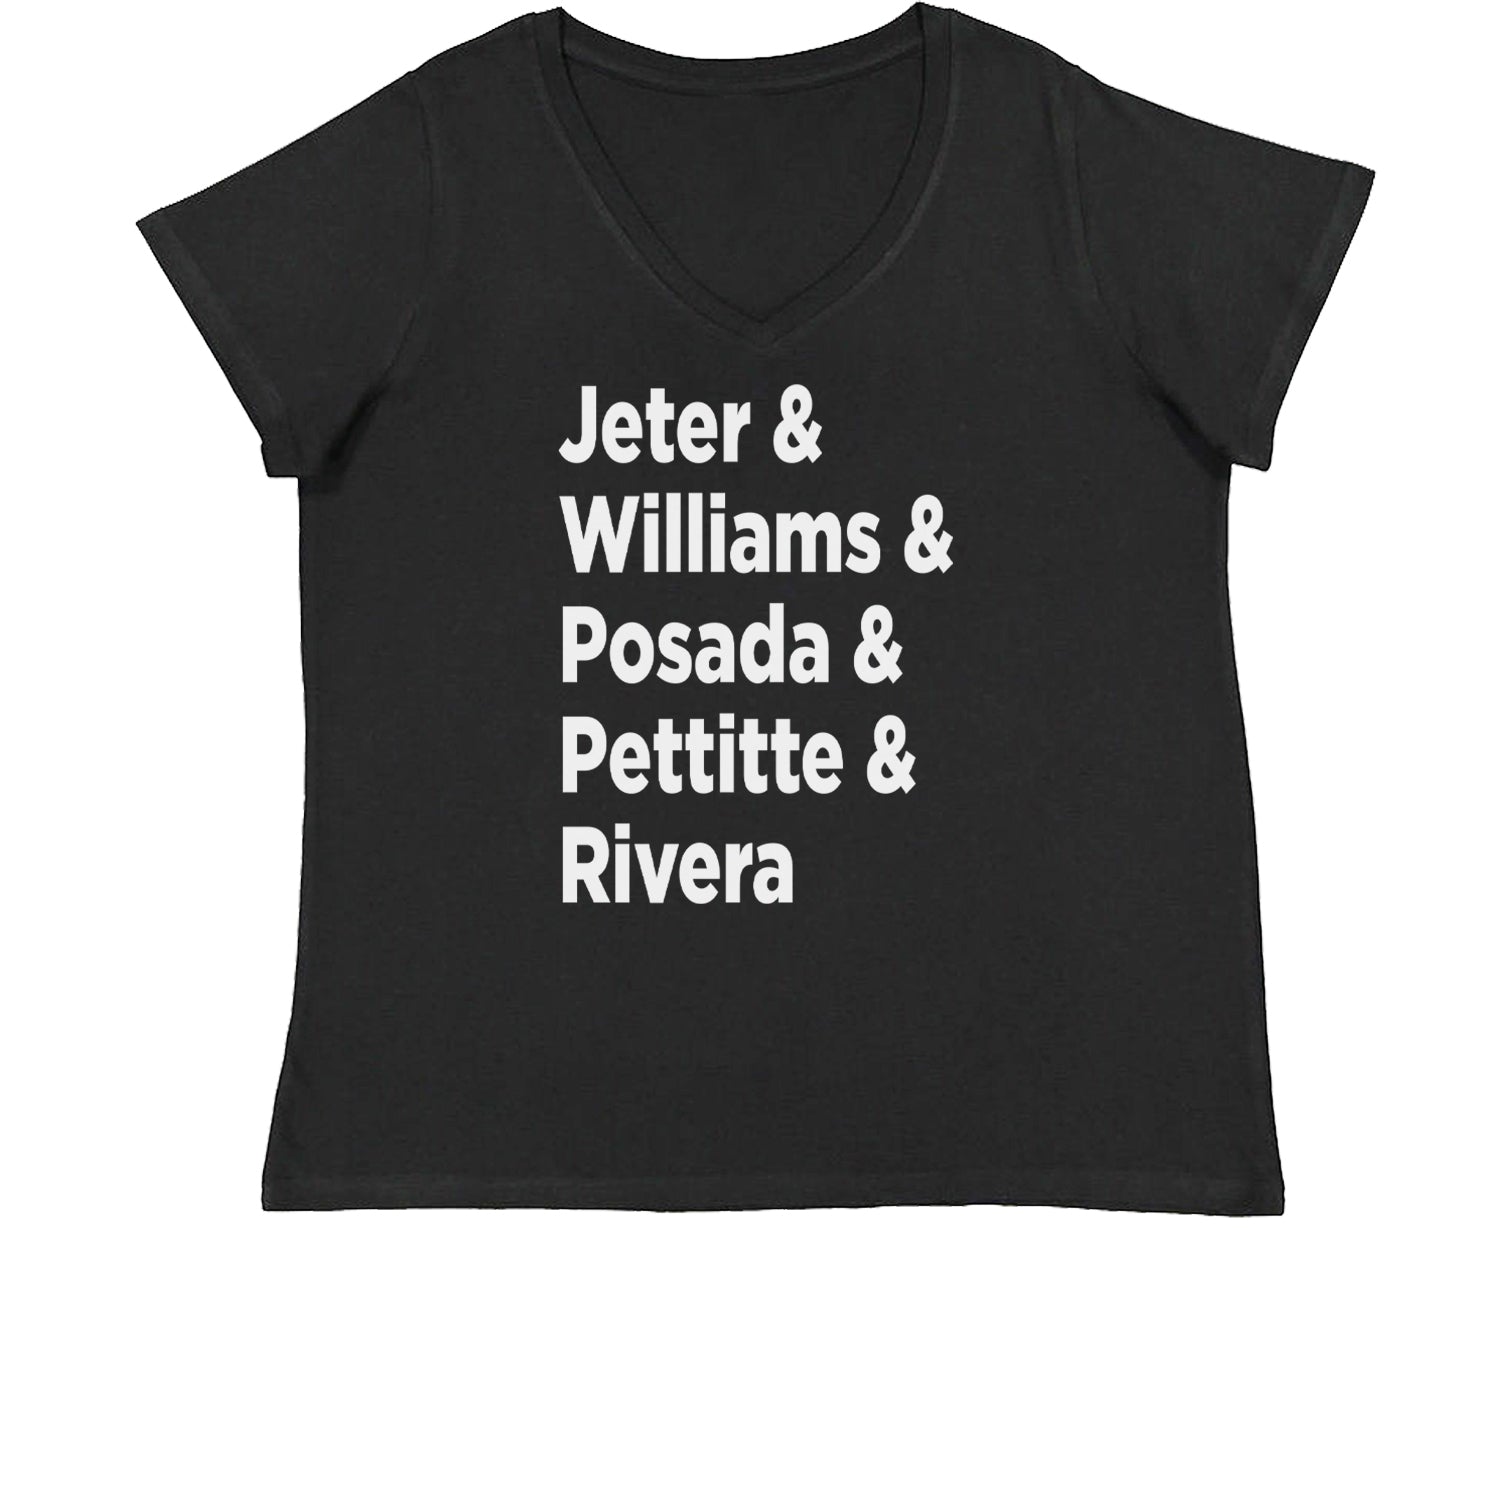 Jeter and Williams and Posada and Pettitte and Rivera Womens Plus Size V-Neck T-shirt baseball, comes, here, judge, the by Expression Tees